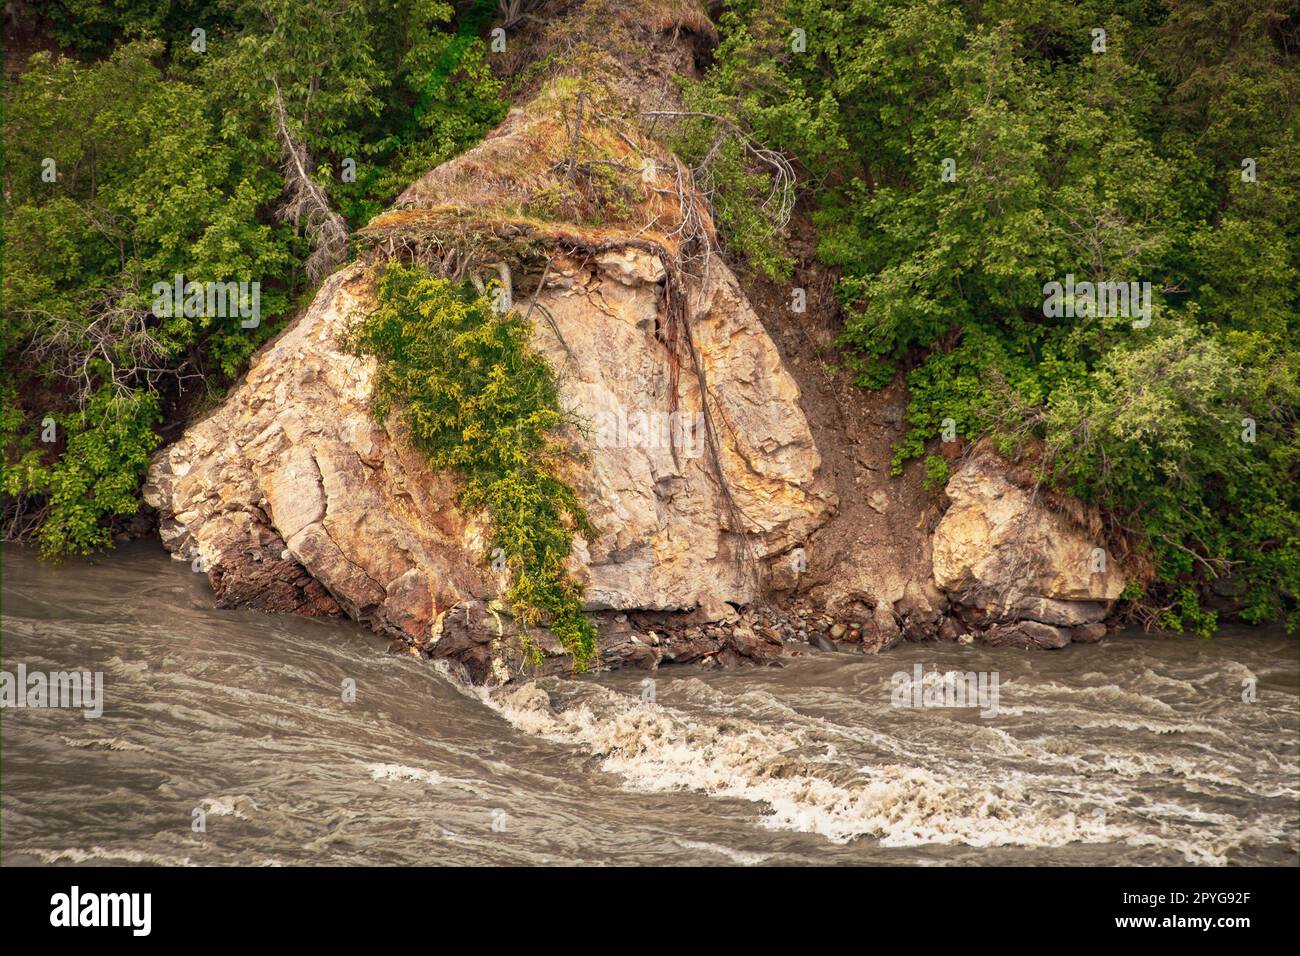 Pine trees growing upside down on huge boulder outcropping on rapidly flowing river through a pine forest Stock Photo